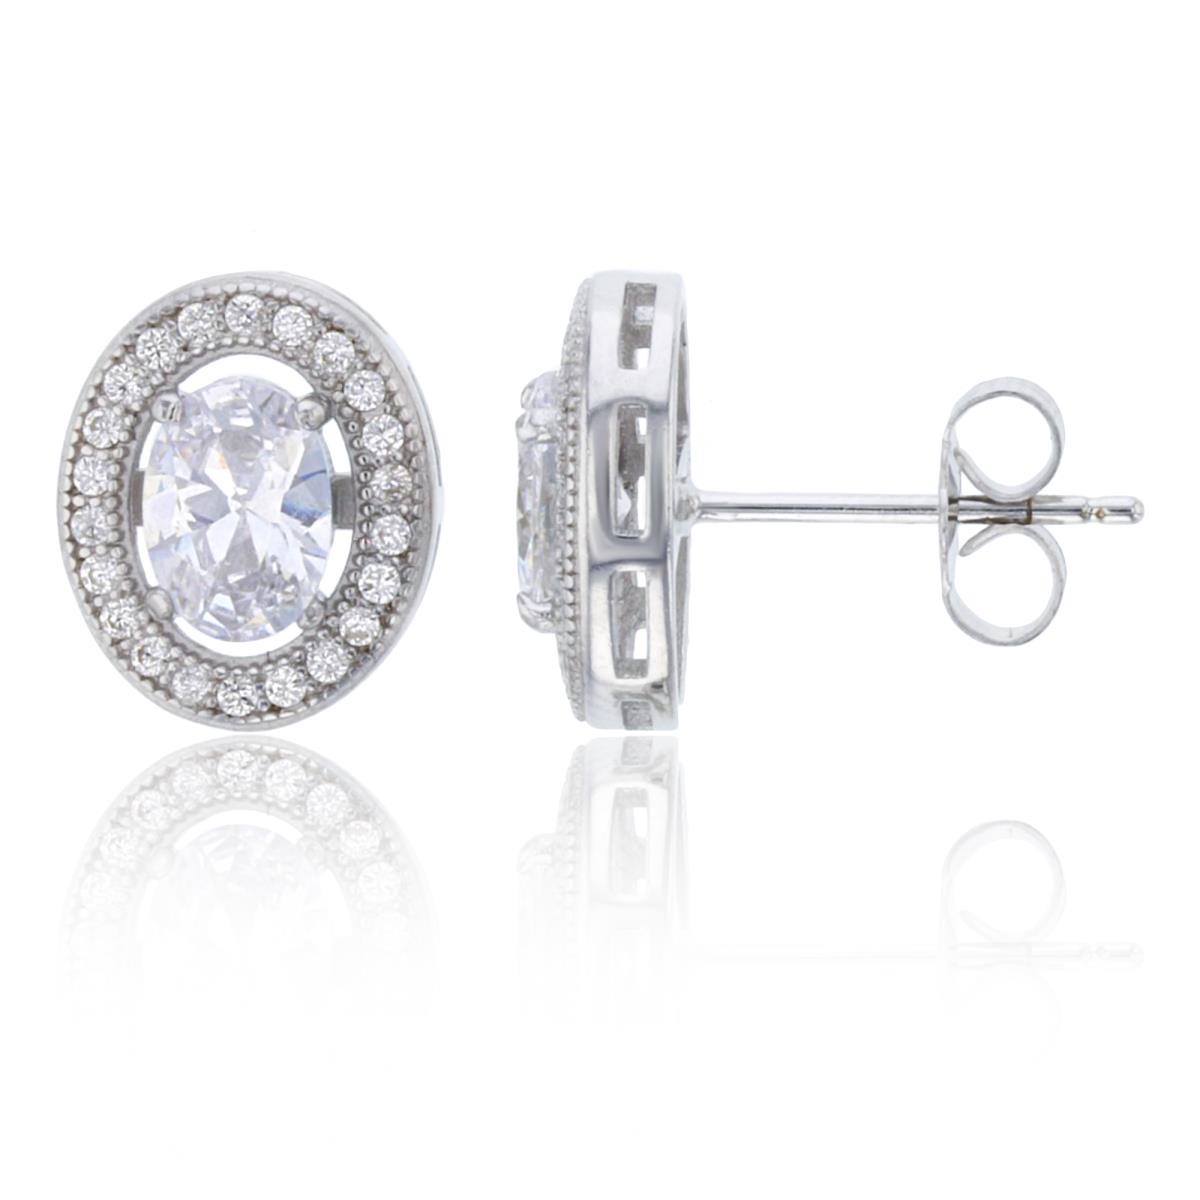 Sterling Silver 7x5mm Oval Halo Pave Stud Earring